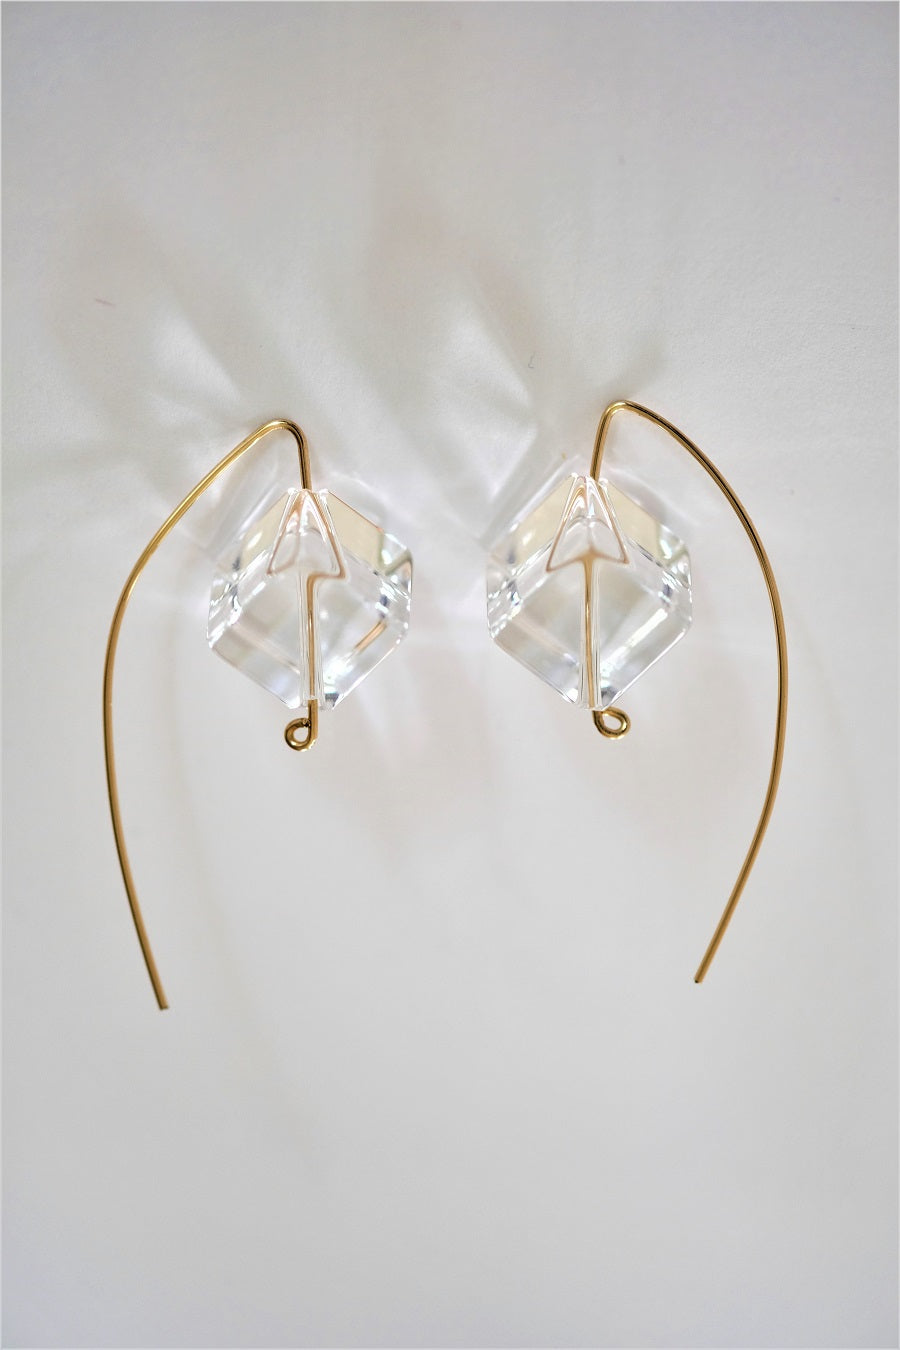 Rock Crystal Cubes on 14k gold filled Wire Earrings